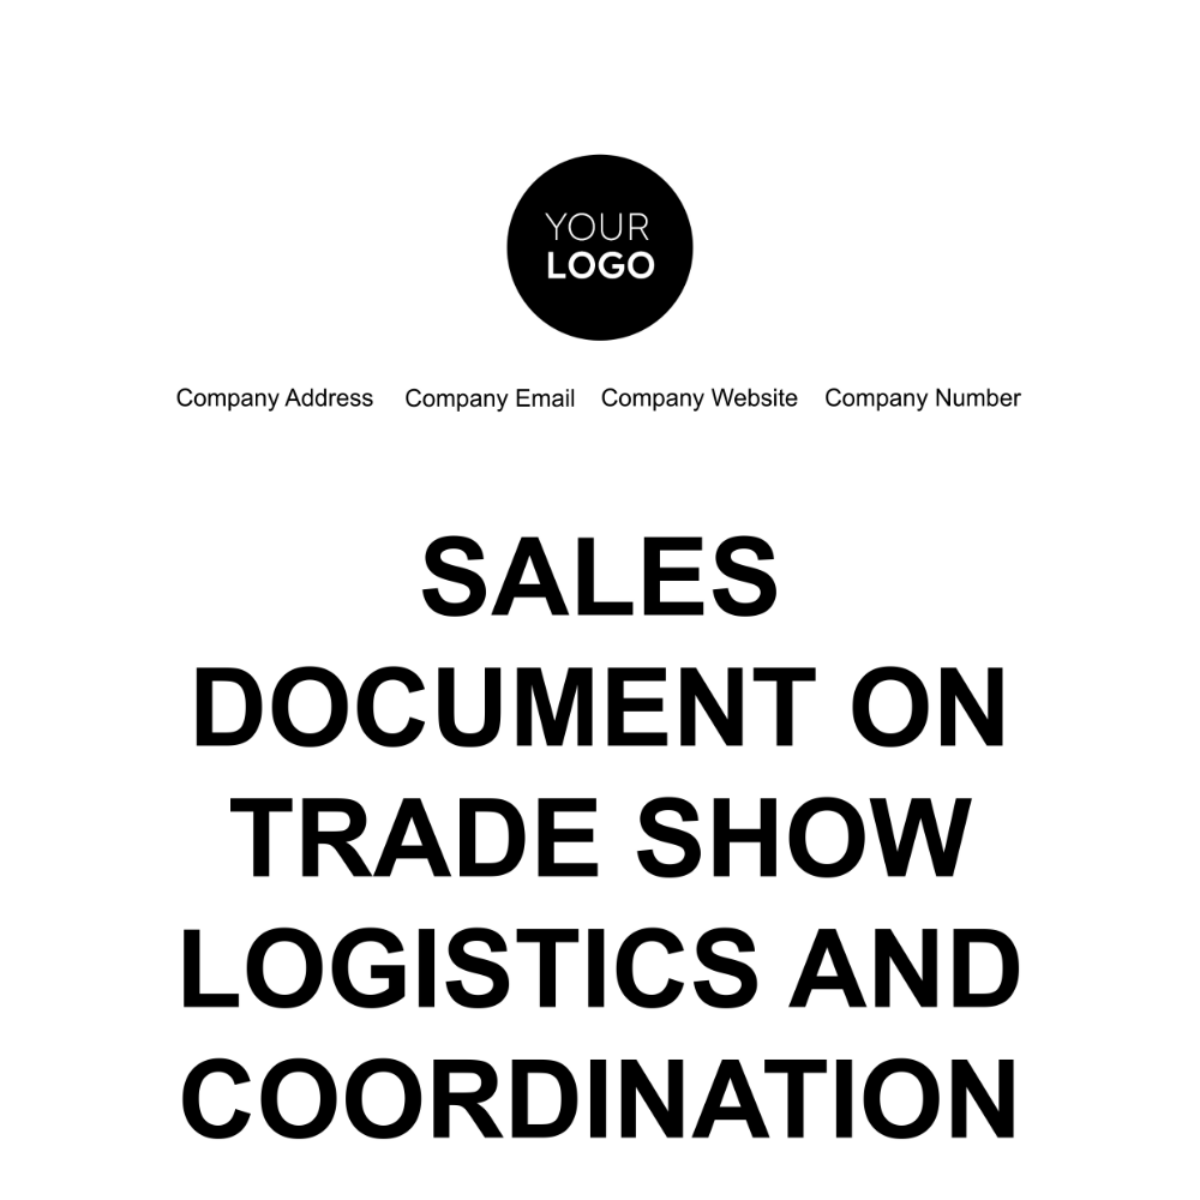 Free Sales Document on Trade Show Logistics and Coordination Template